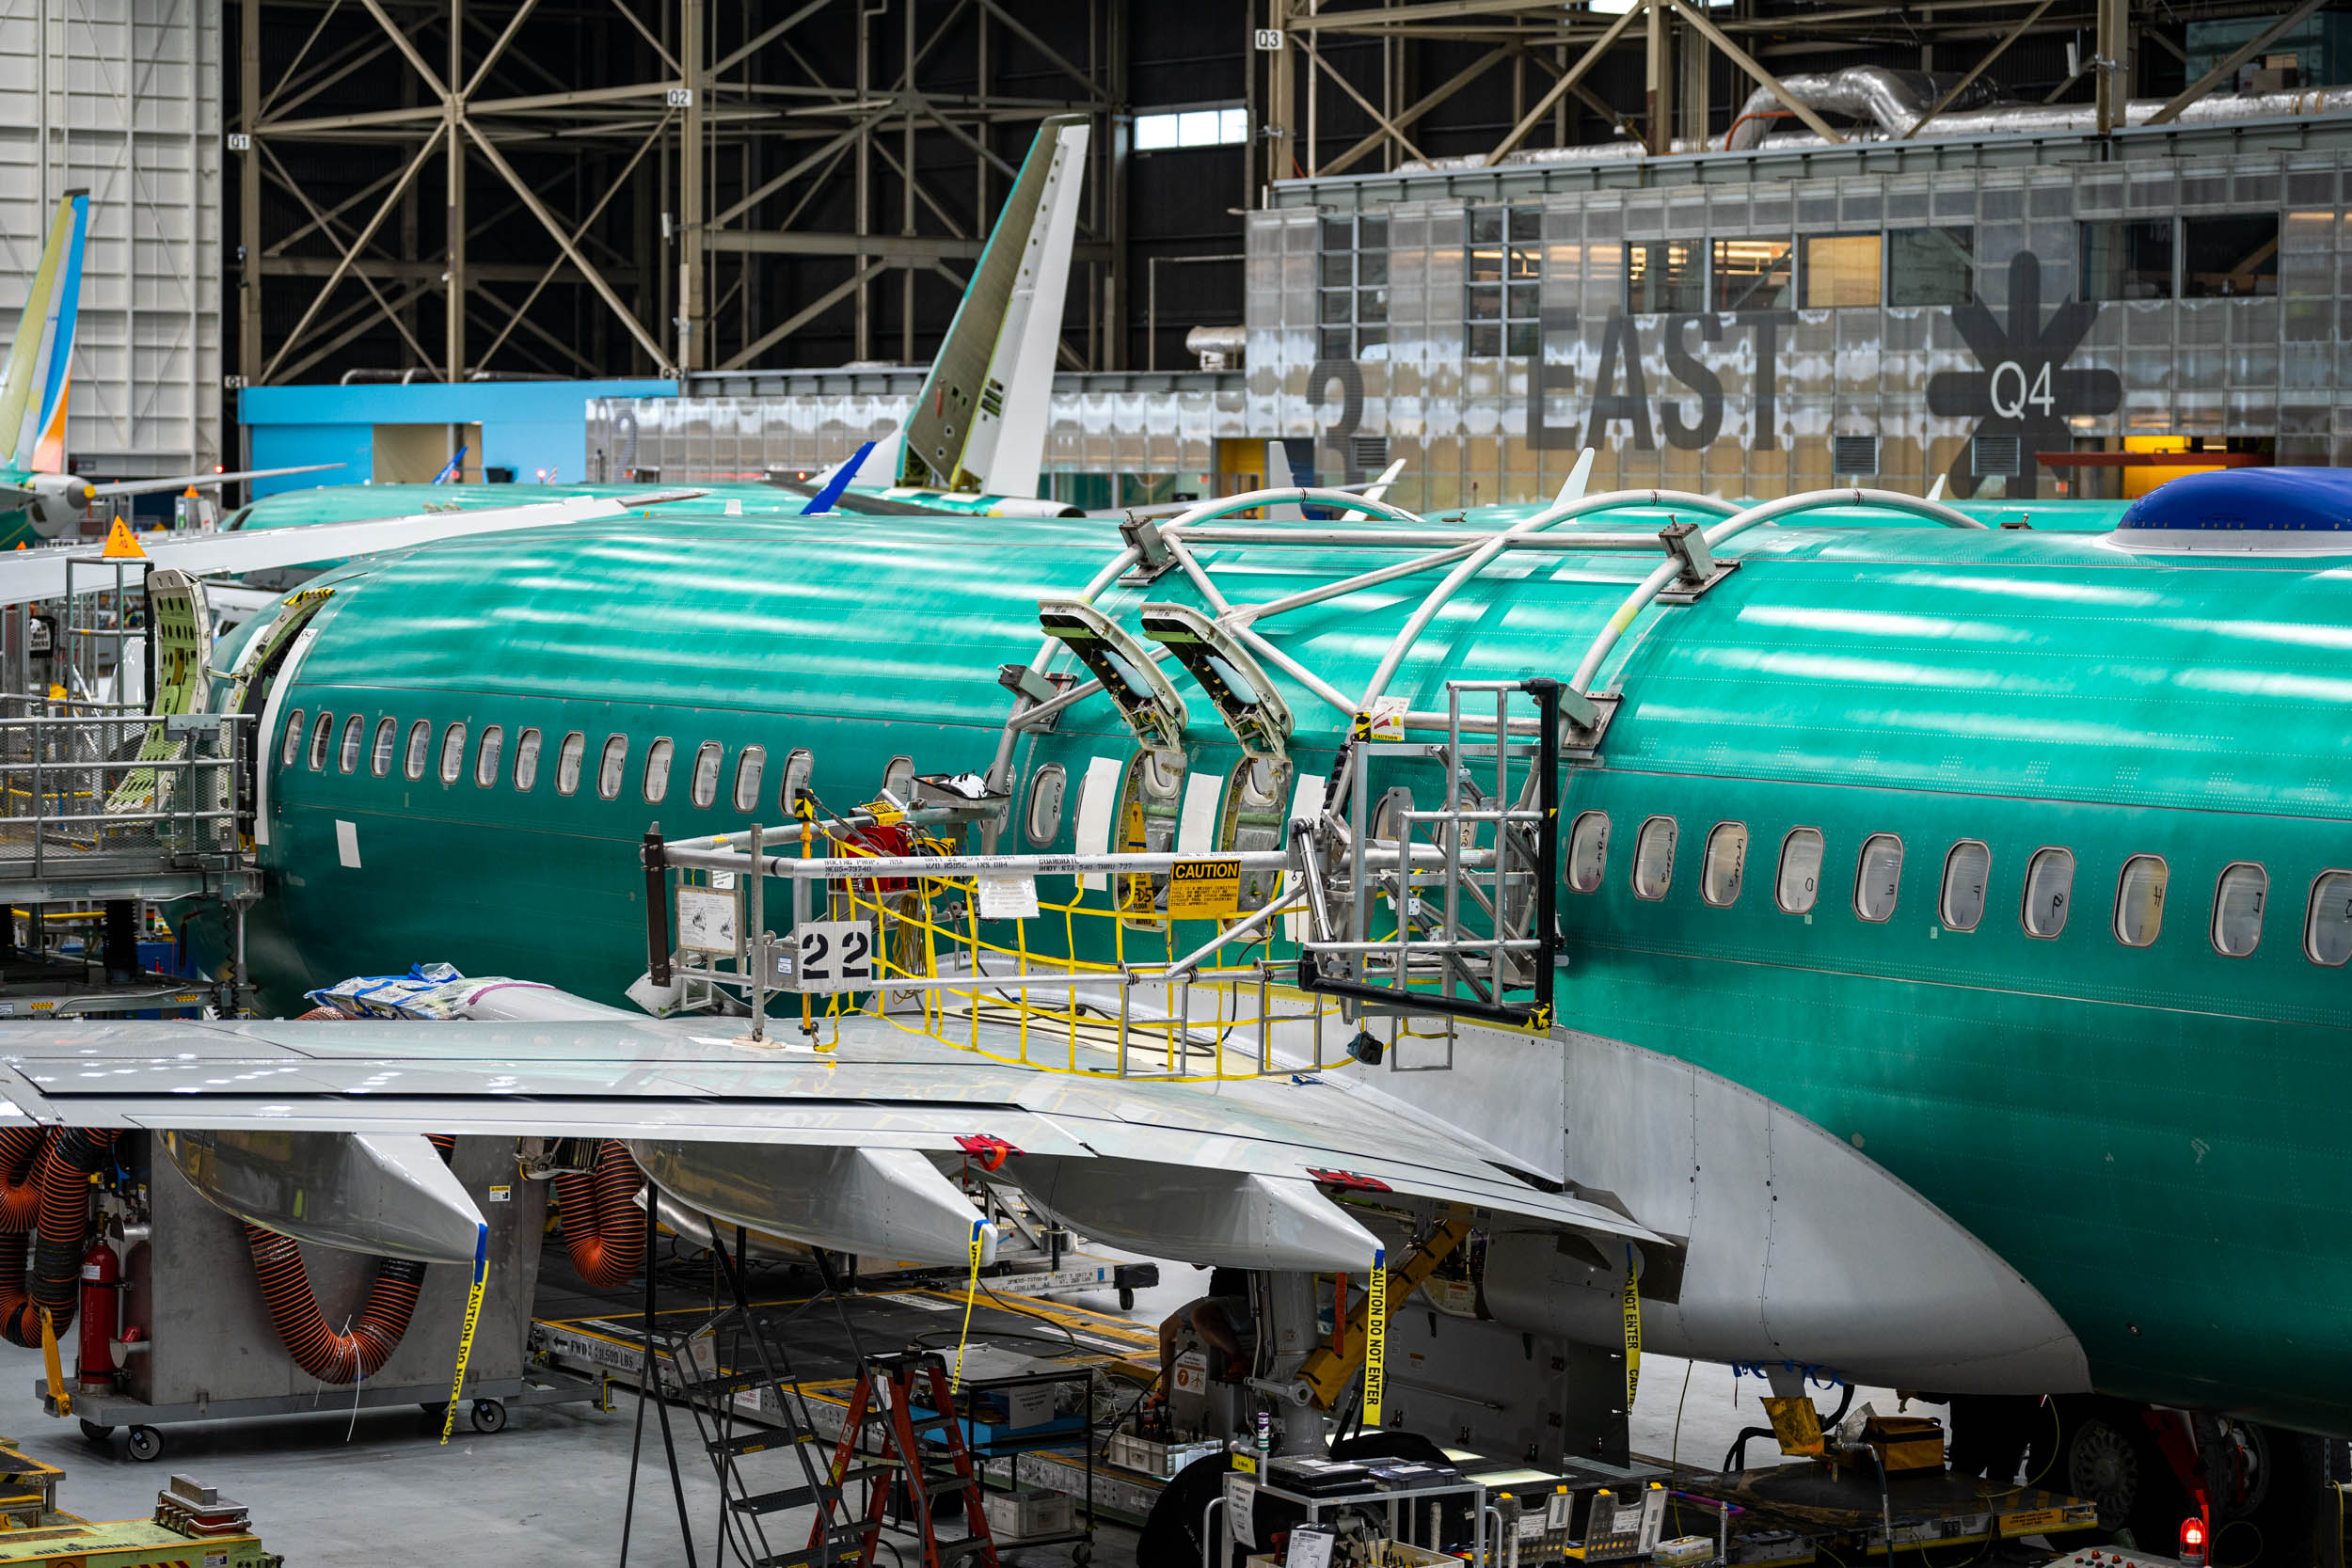 'Boeing needs to become a better company': Airlines slow growth plans amid frustration with planemaker